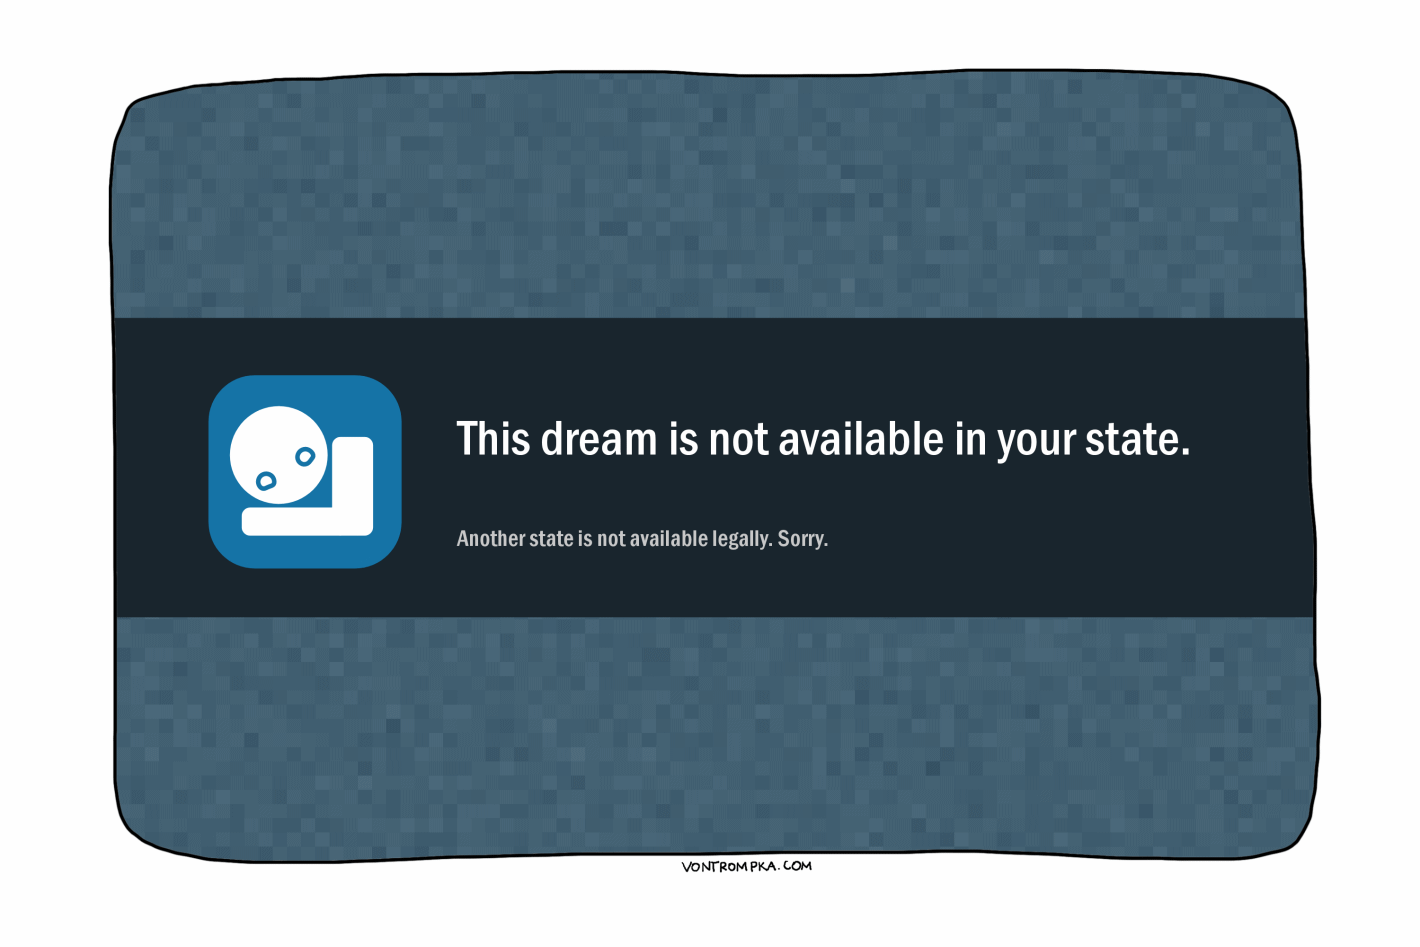 This dream is not available in your state. Another state is not available legally. Sorry.